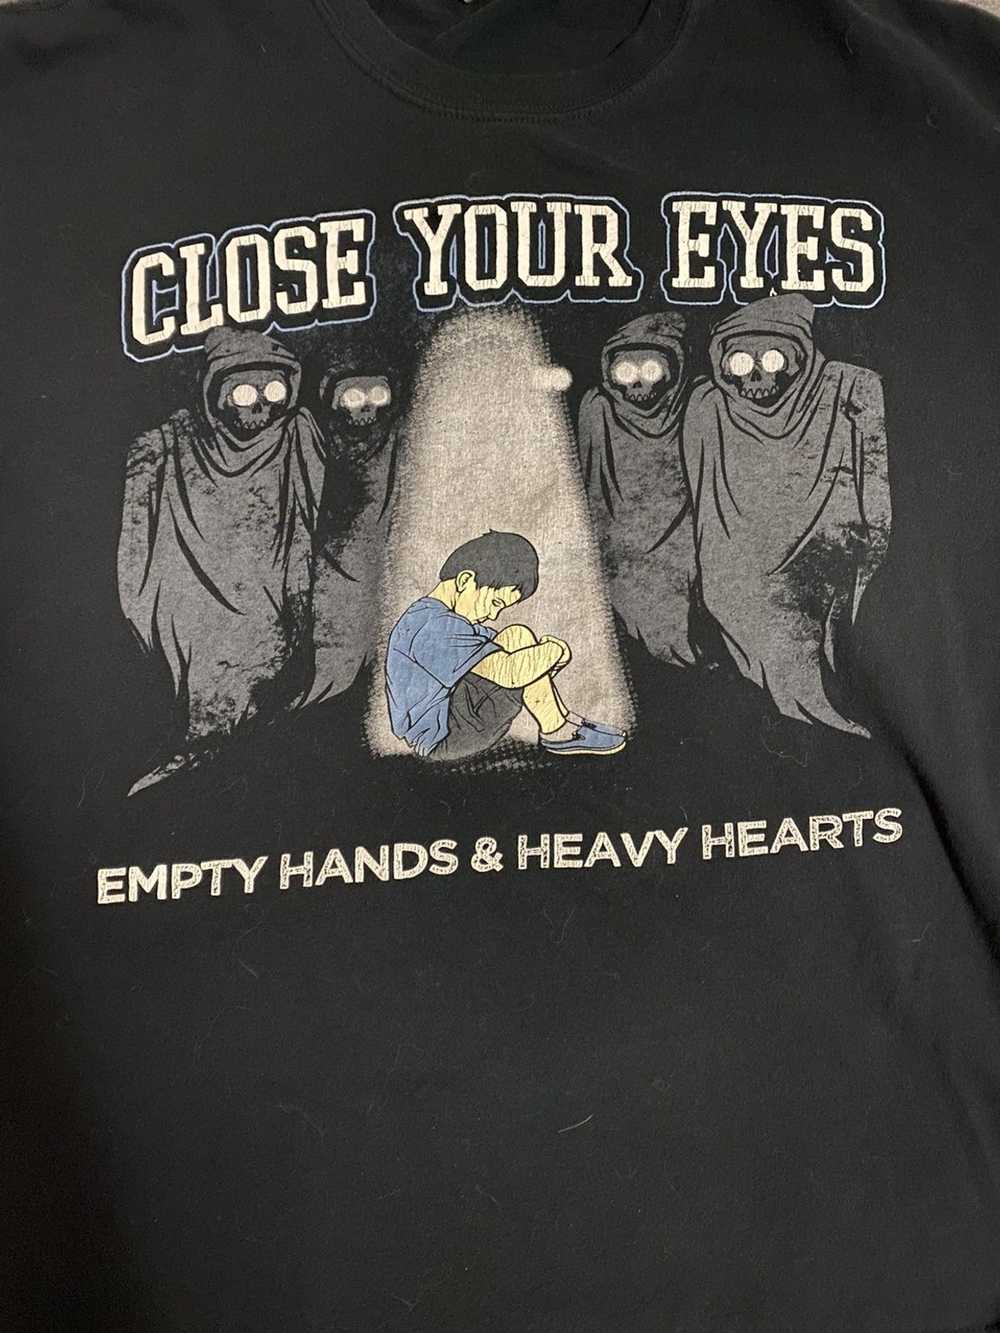 Vintage Close your eyes tee - image 2